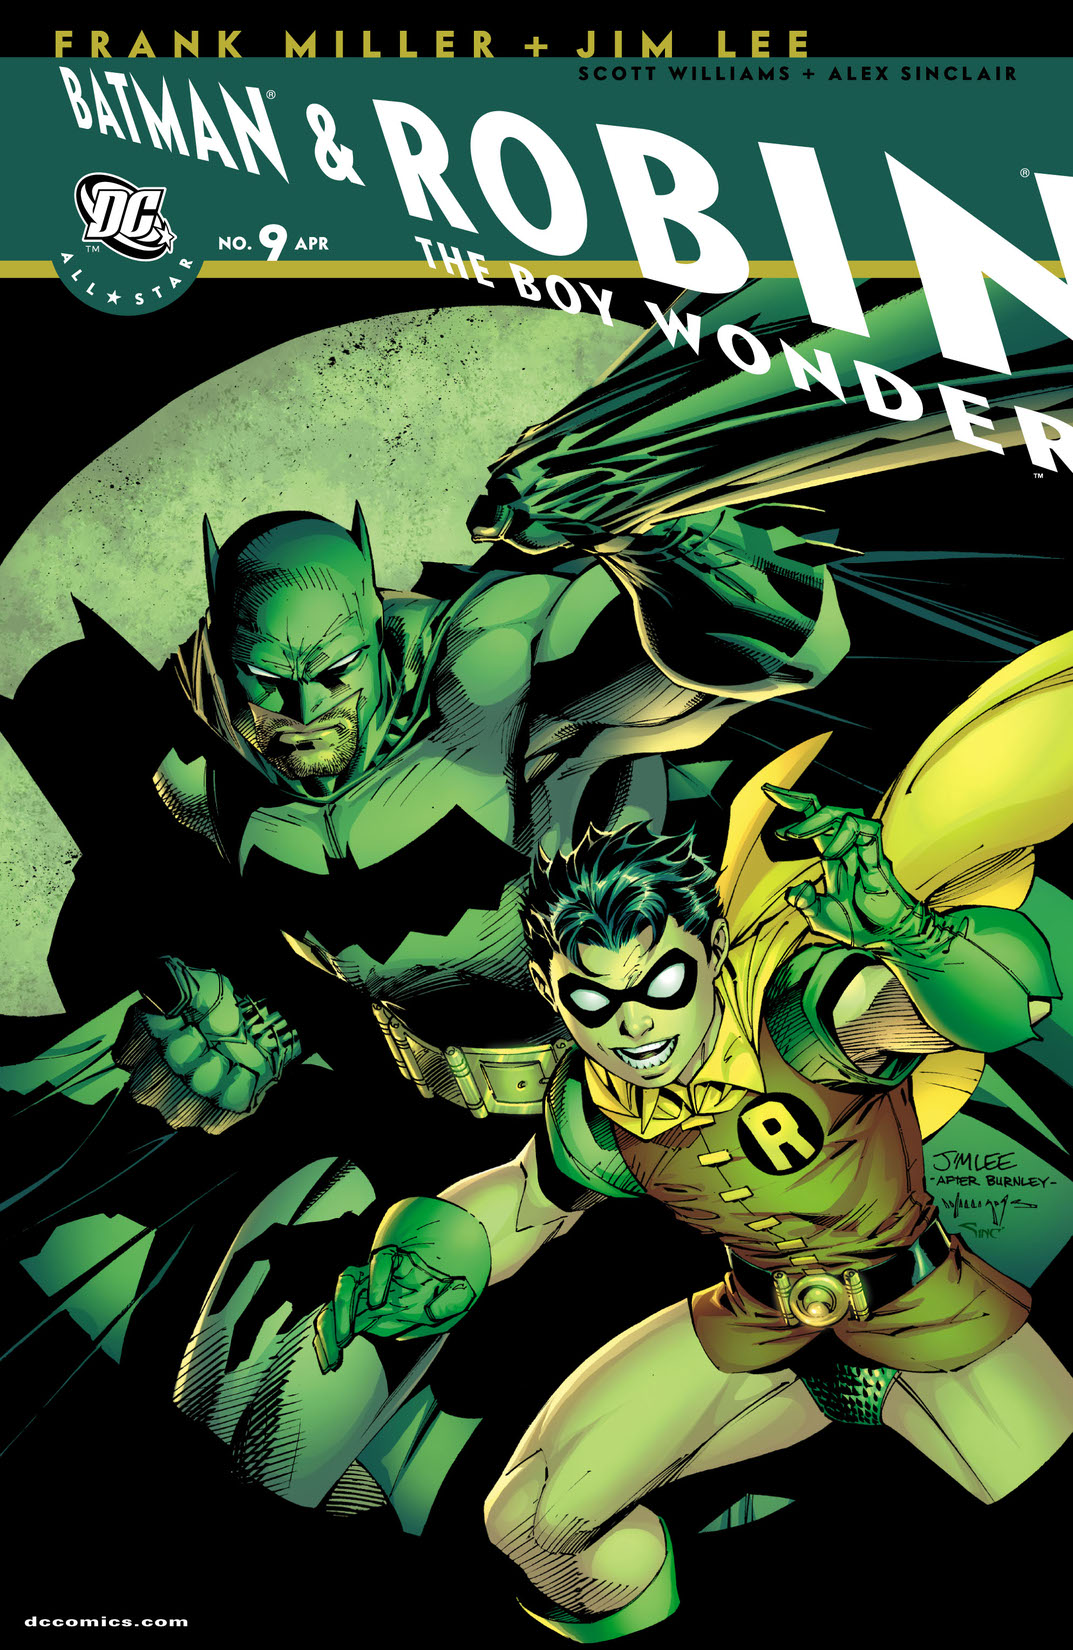 All-Star Batman & Robin, The Boy Wonder #9 preview images